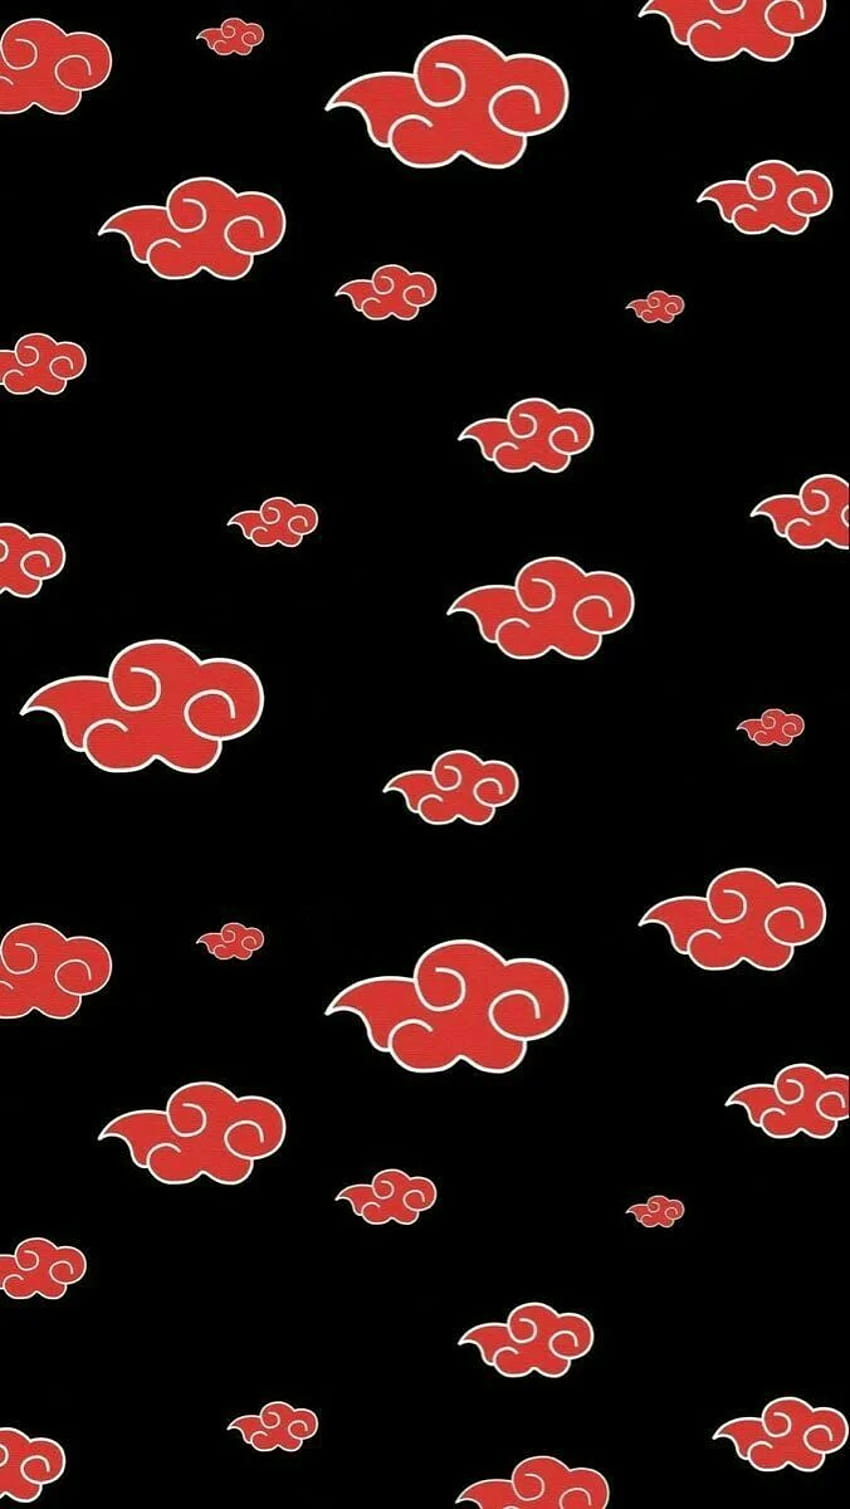 I found a cool Akatsuki cloud online today so decided to turn it into a  really high resolution wallpaper for my phone  rNaruto